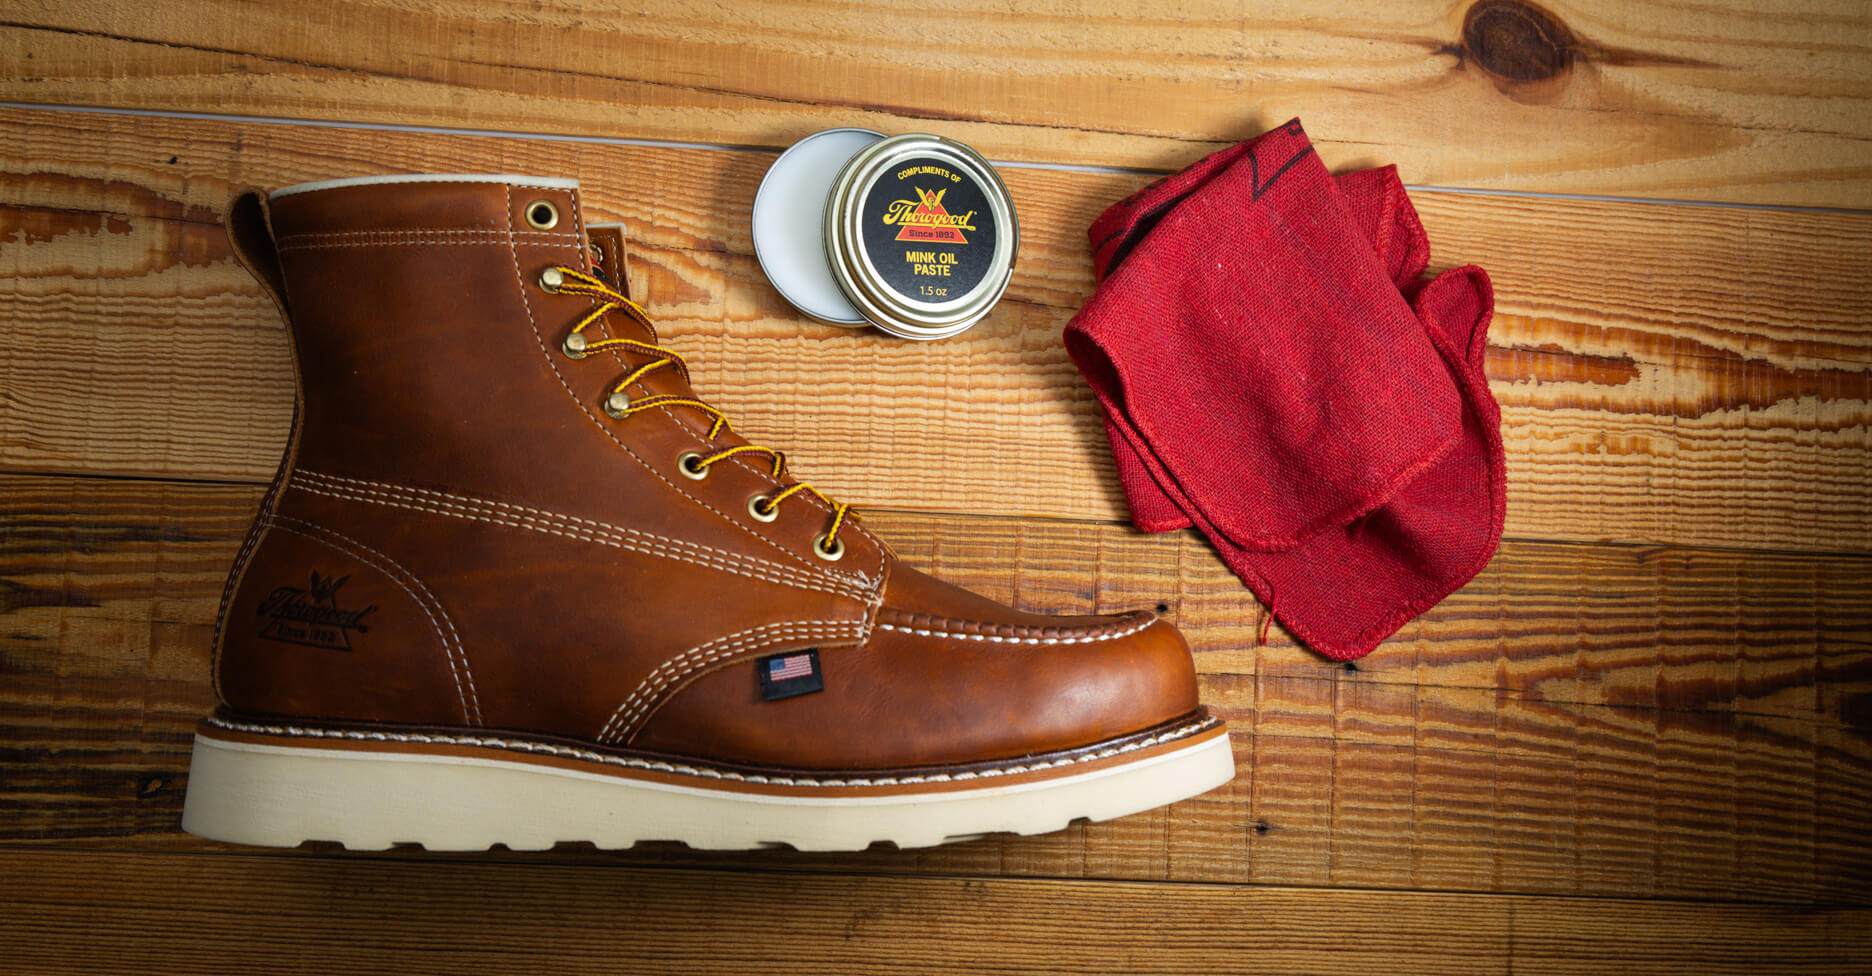 American Heritage boot and paste